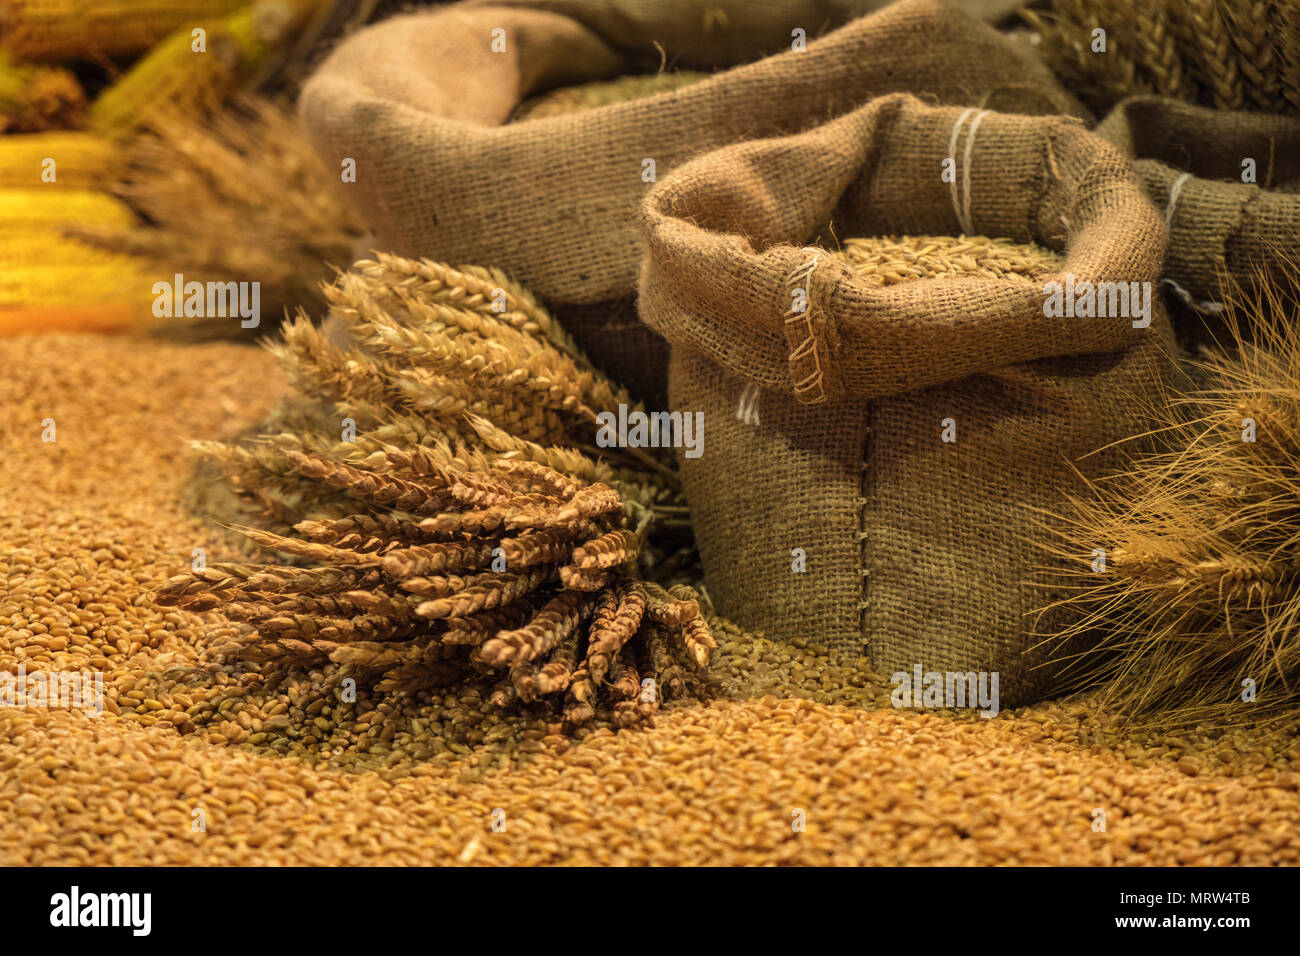 Assortment Of Grains And Cereals In Canvas Bags With